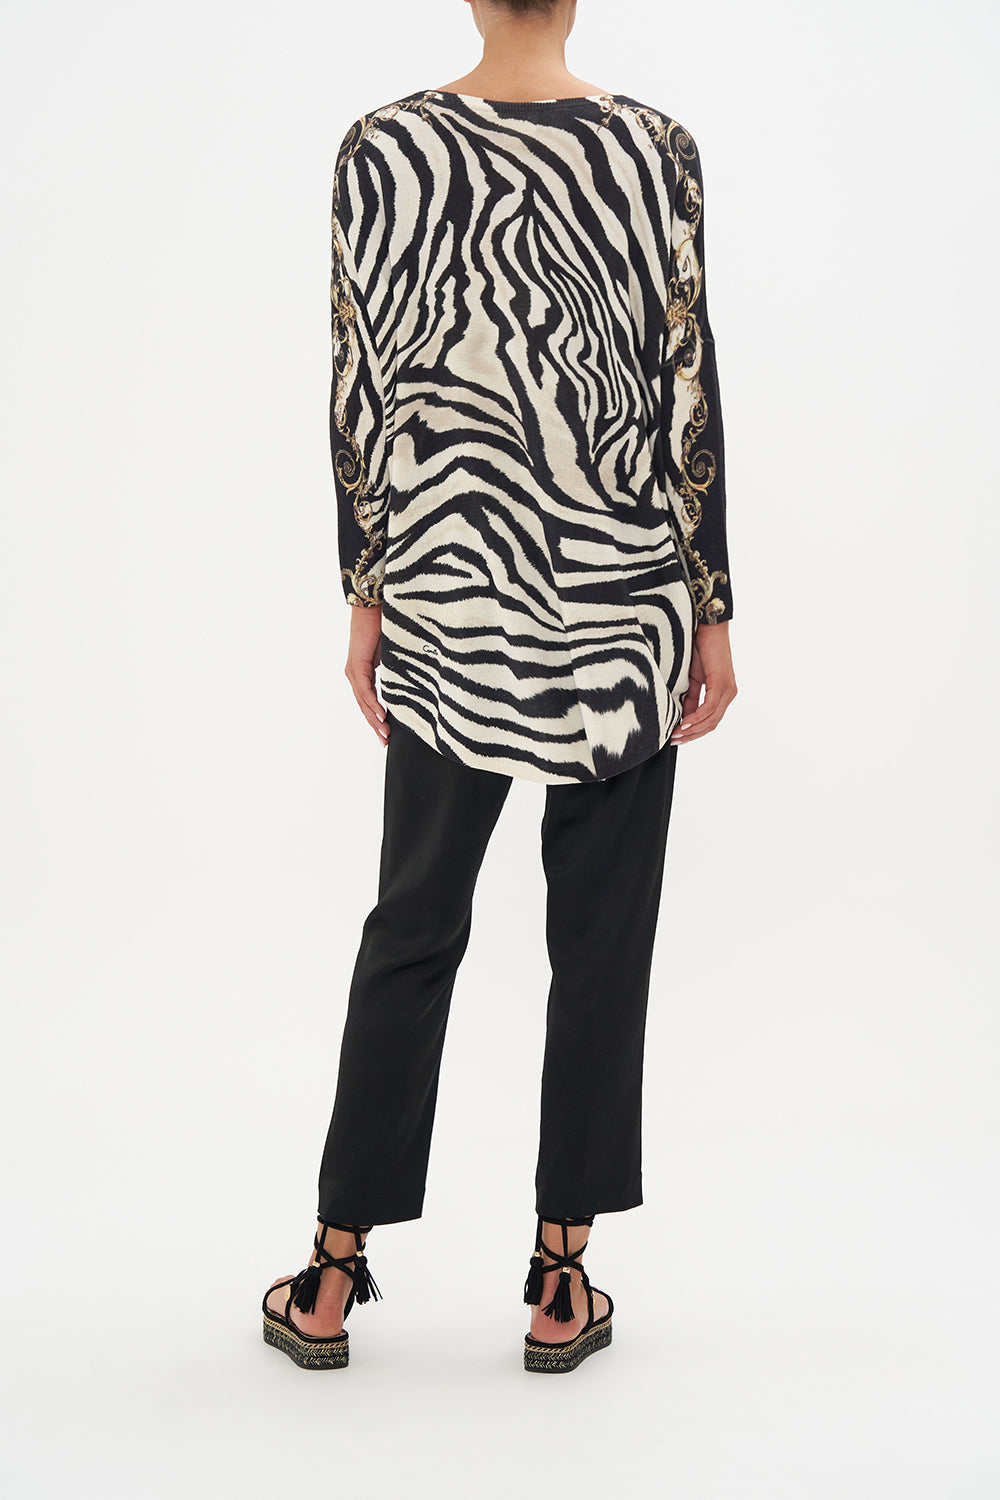 OVERSIZE LONG SLEEVE KNIT TOP EARN YOUR STRIPES